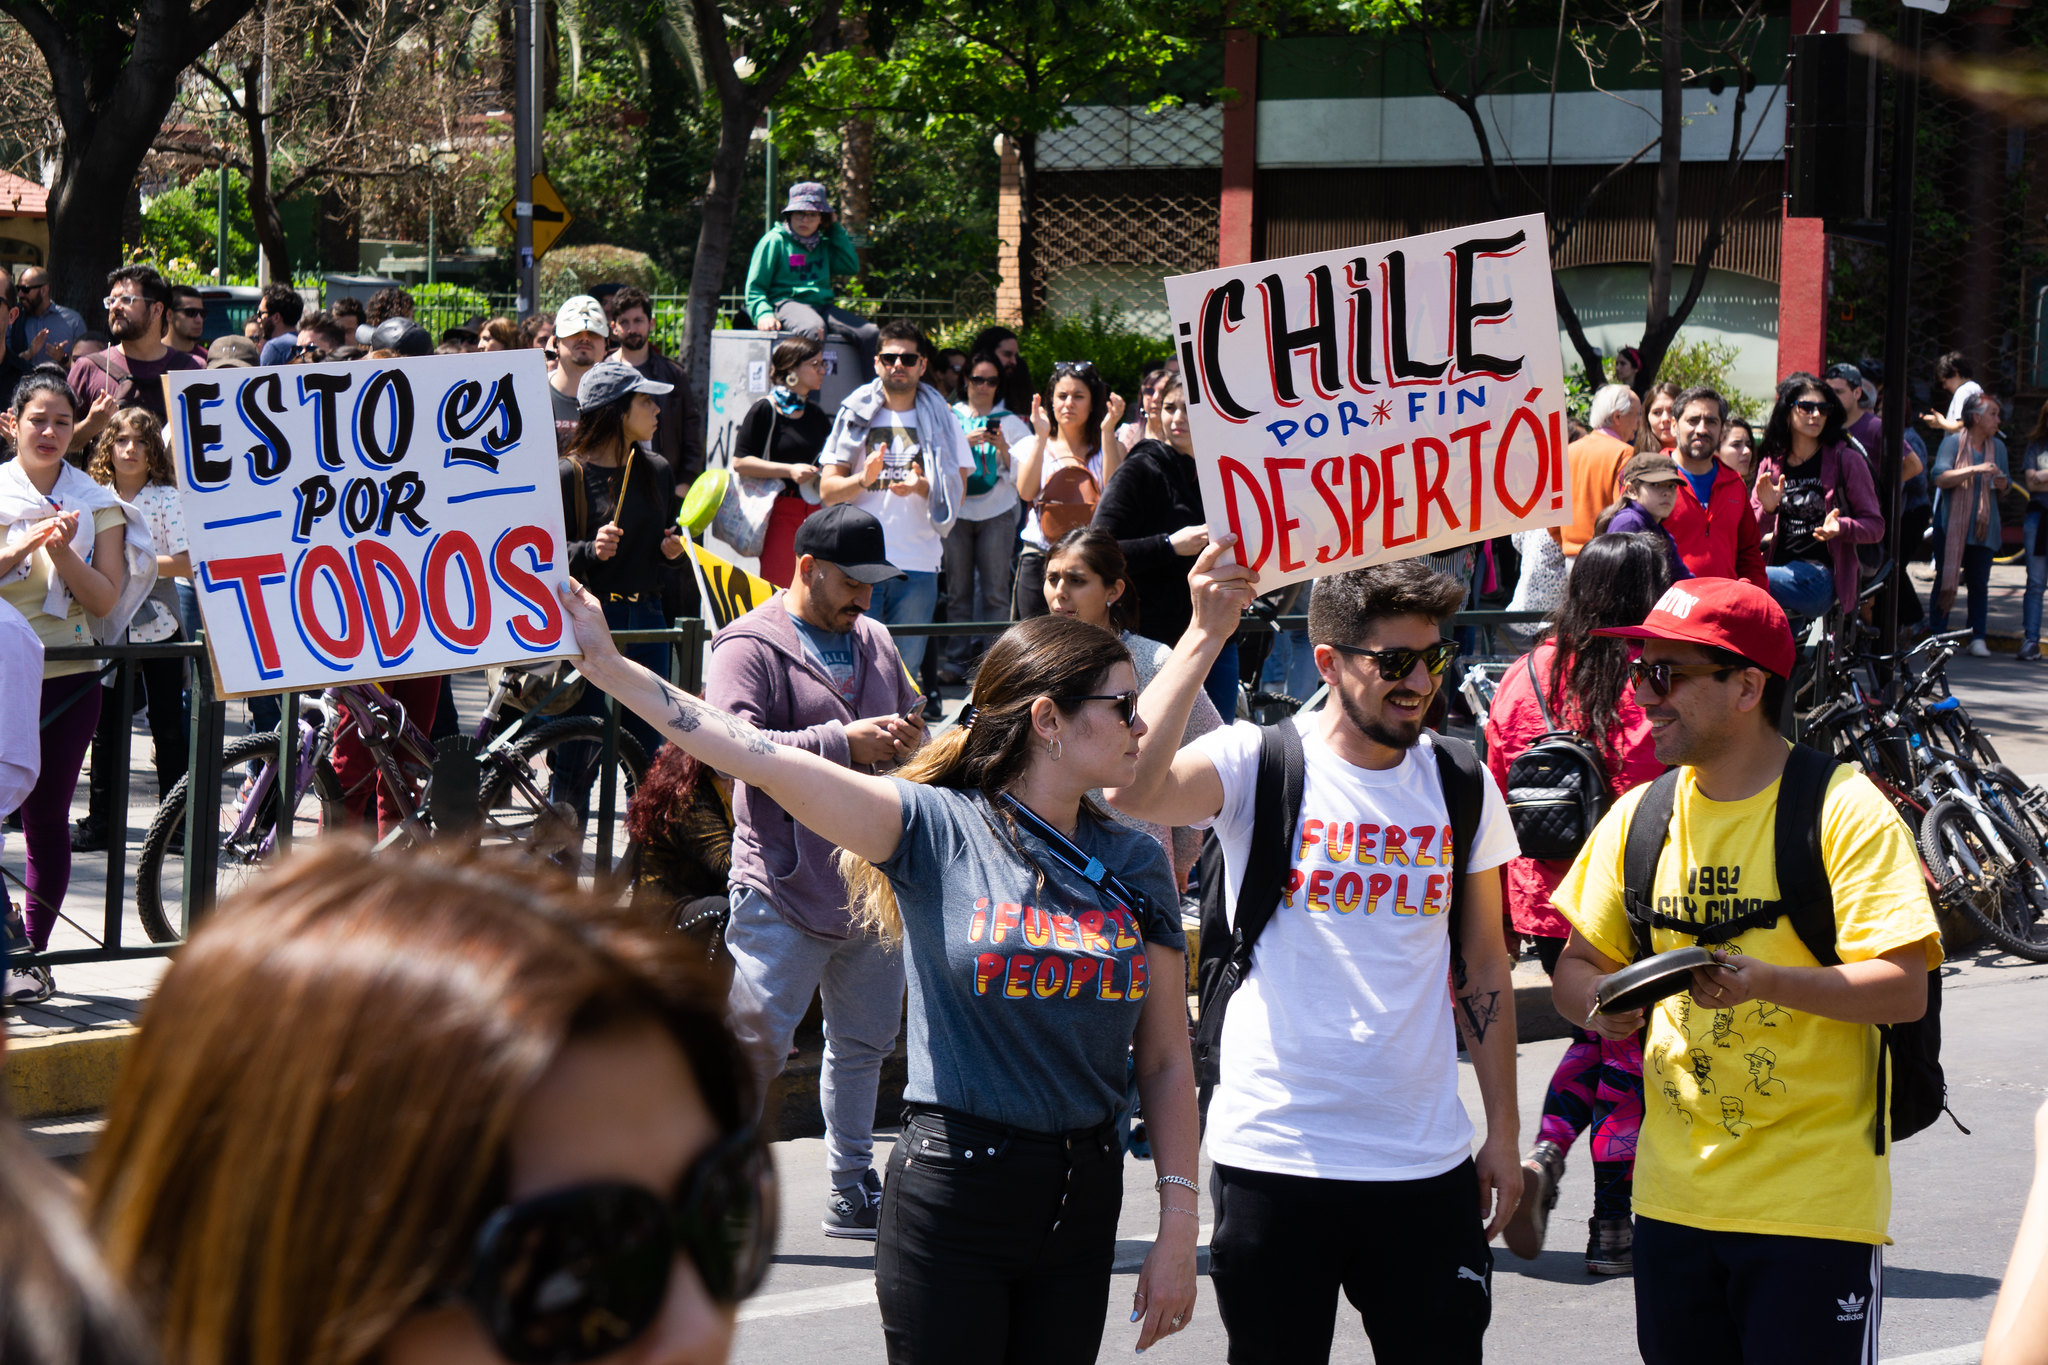 People on the streets in Chile protesting, October 2019.